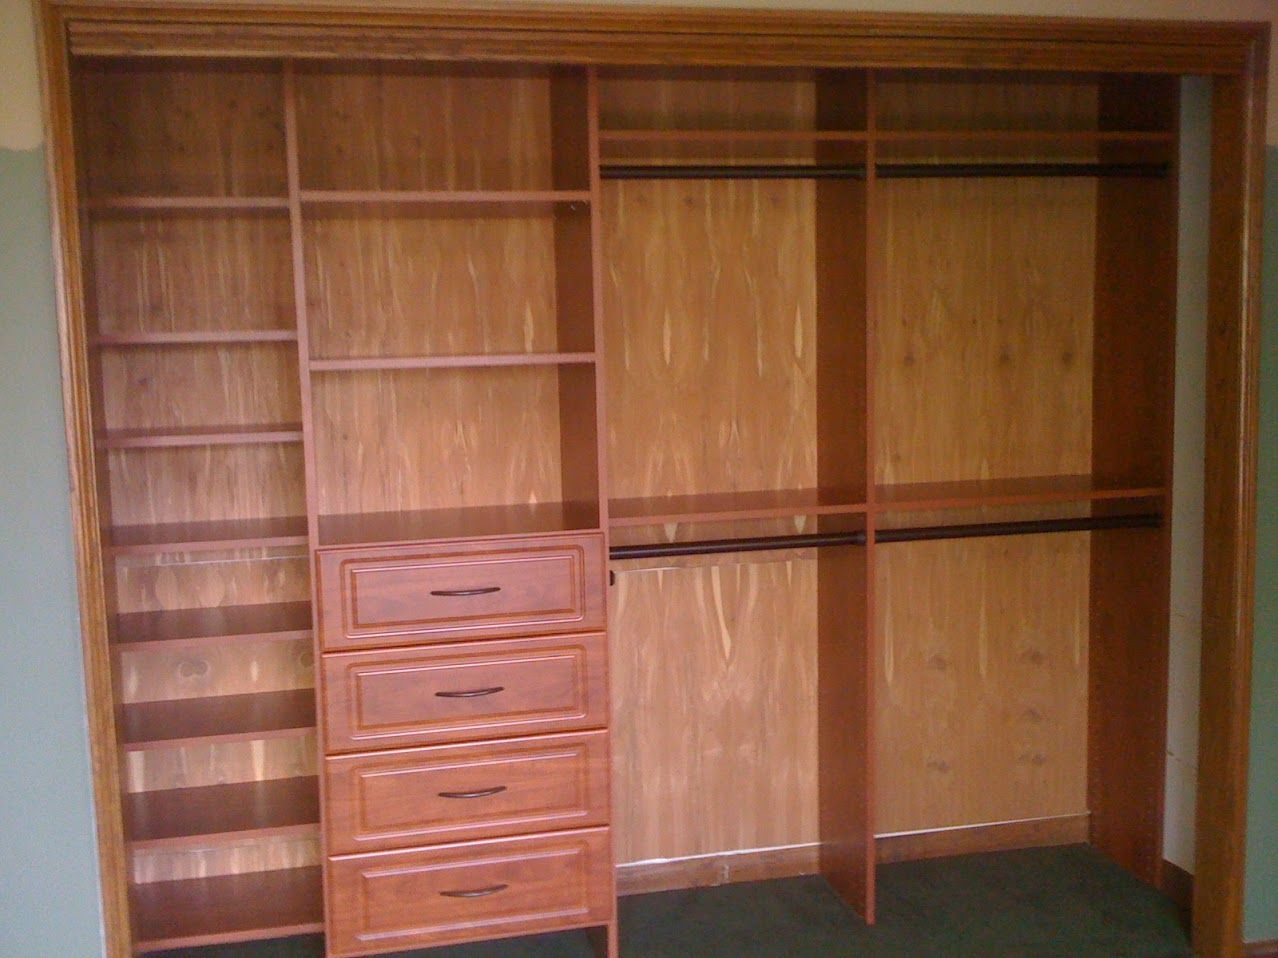 https://tailoredcloset.com/siteassets/_imported-fe-blocks/_local-galleries/desmoines-gallery/36-reach-in-closet-wood.jpg